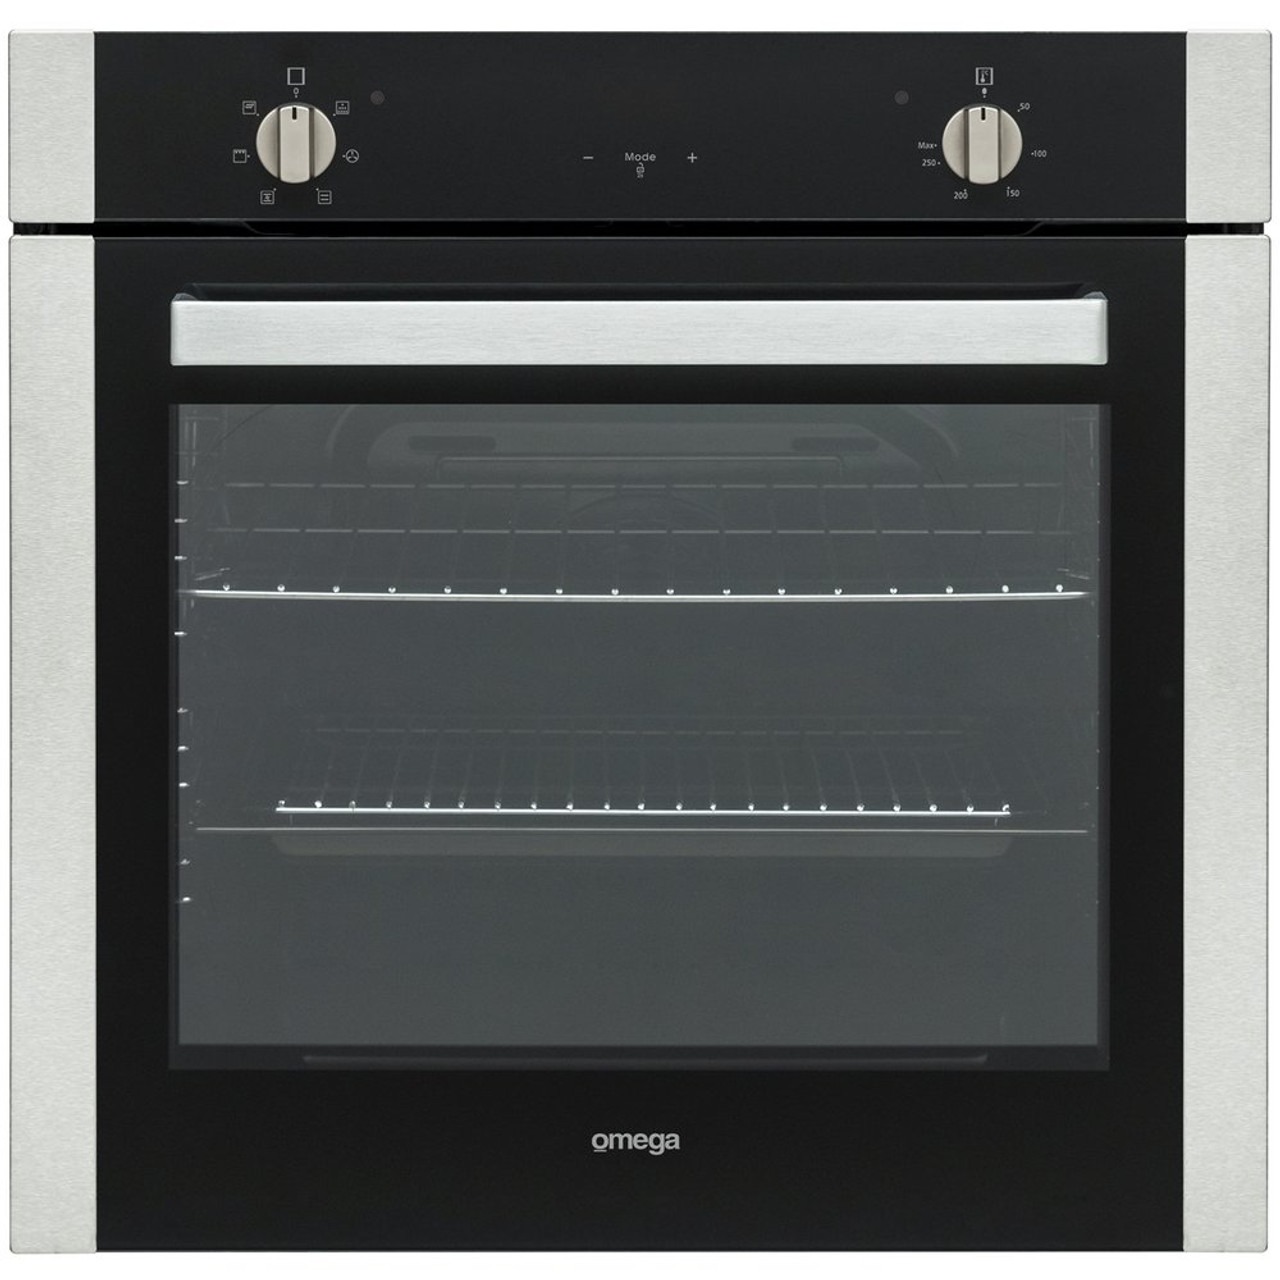 60cm 6 Function Oven - Stainless steel